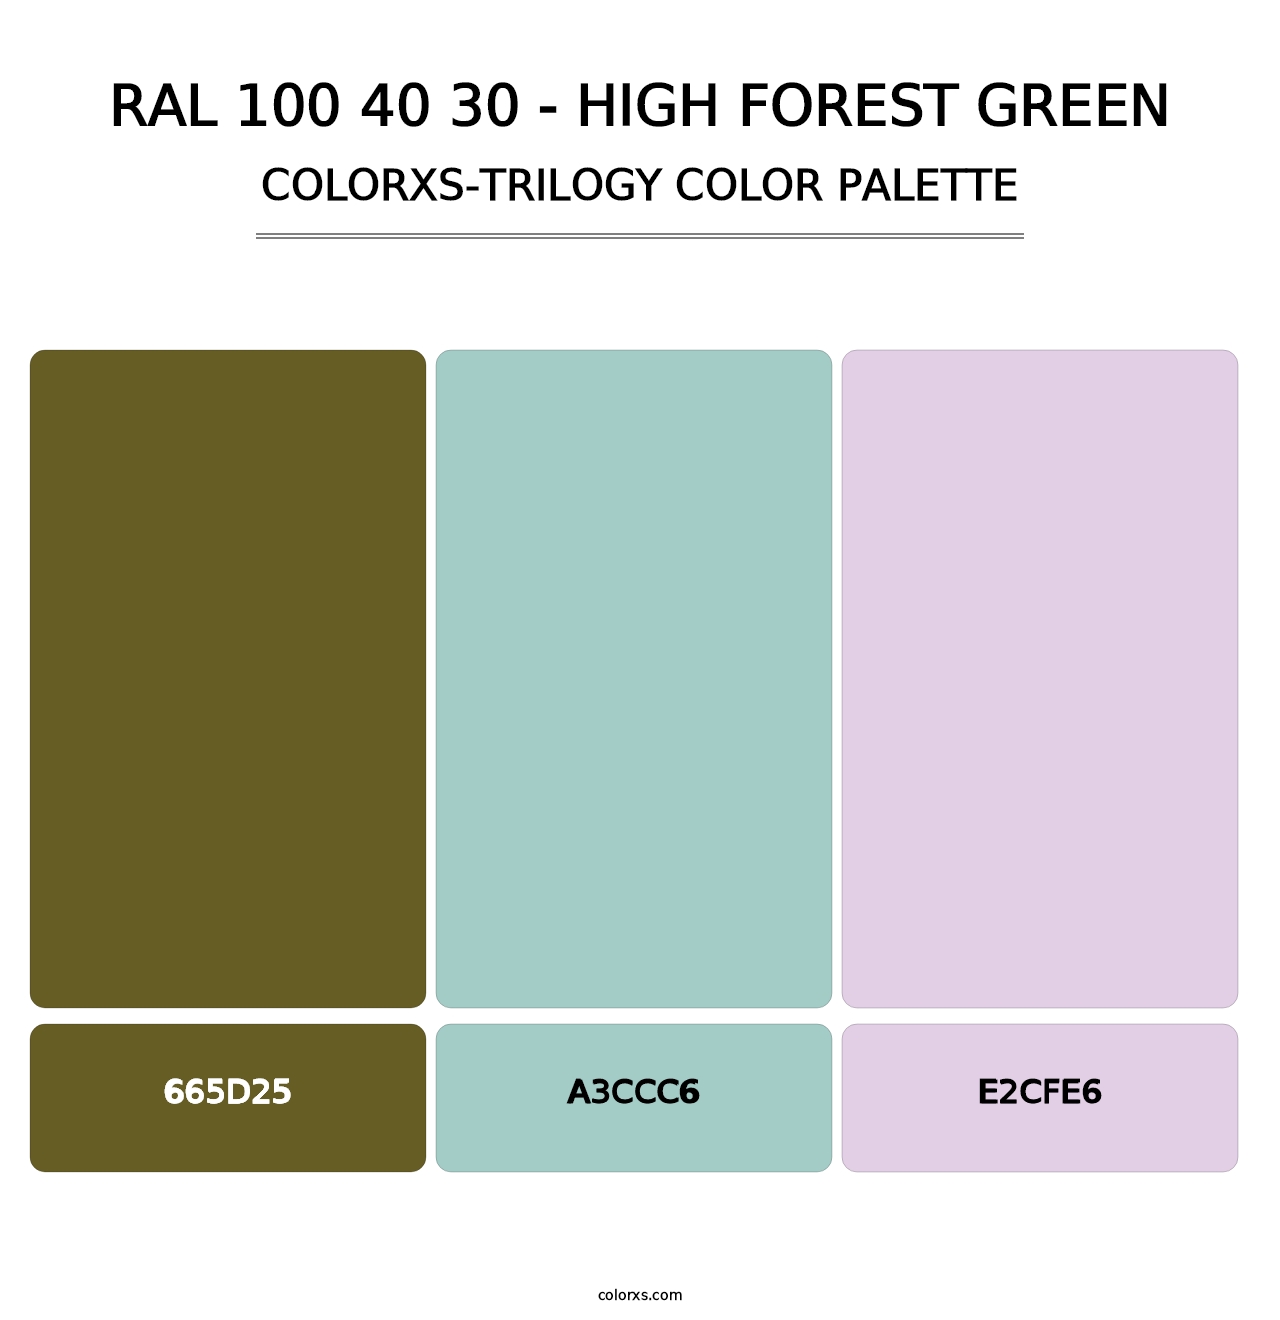 RAL 100 40 30 - High Forest Green - Colorxs Trilogy Palette